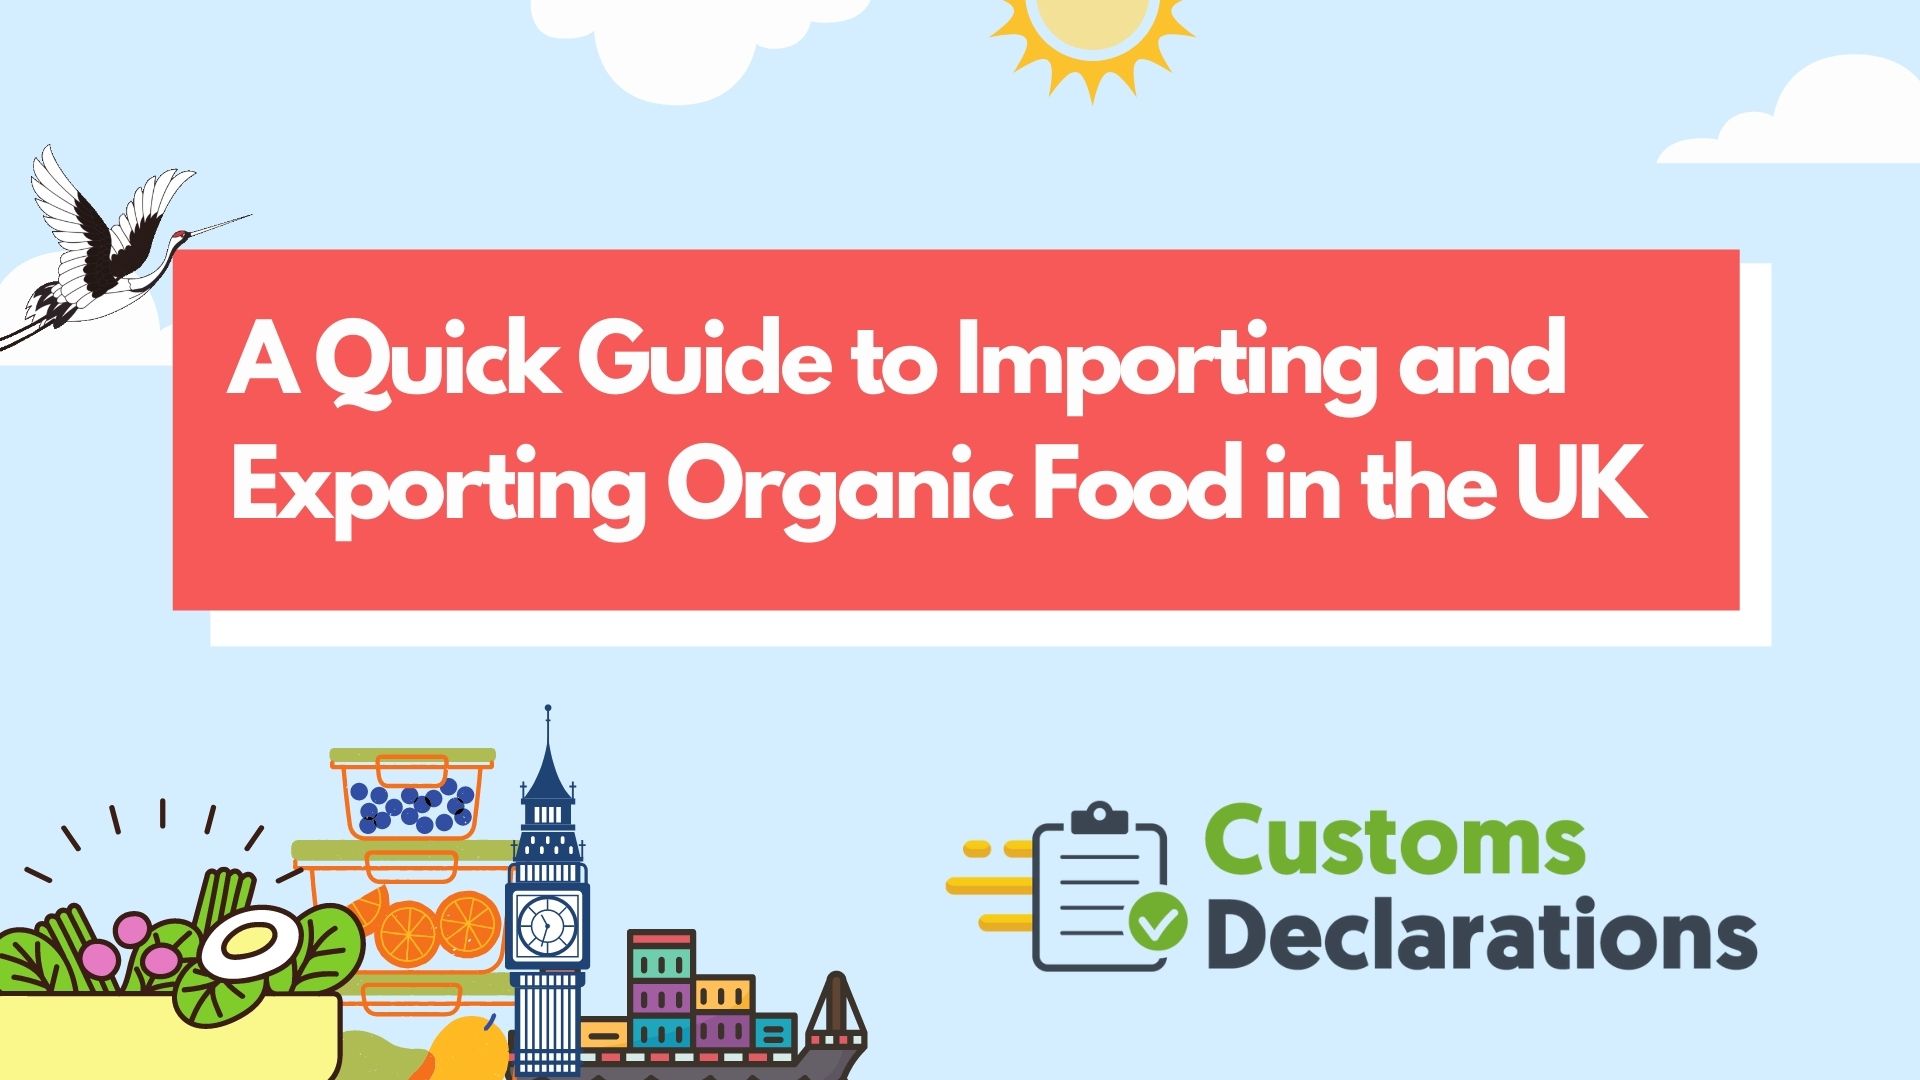 A Quick Guide to Importing and Exporting Organic Food in the UK